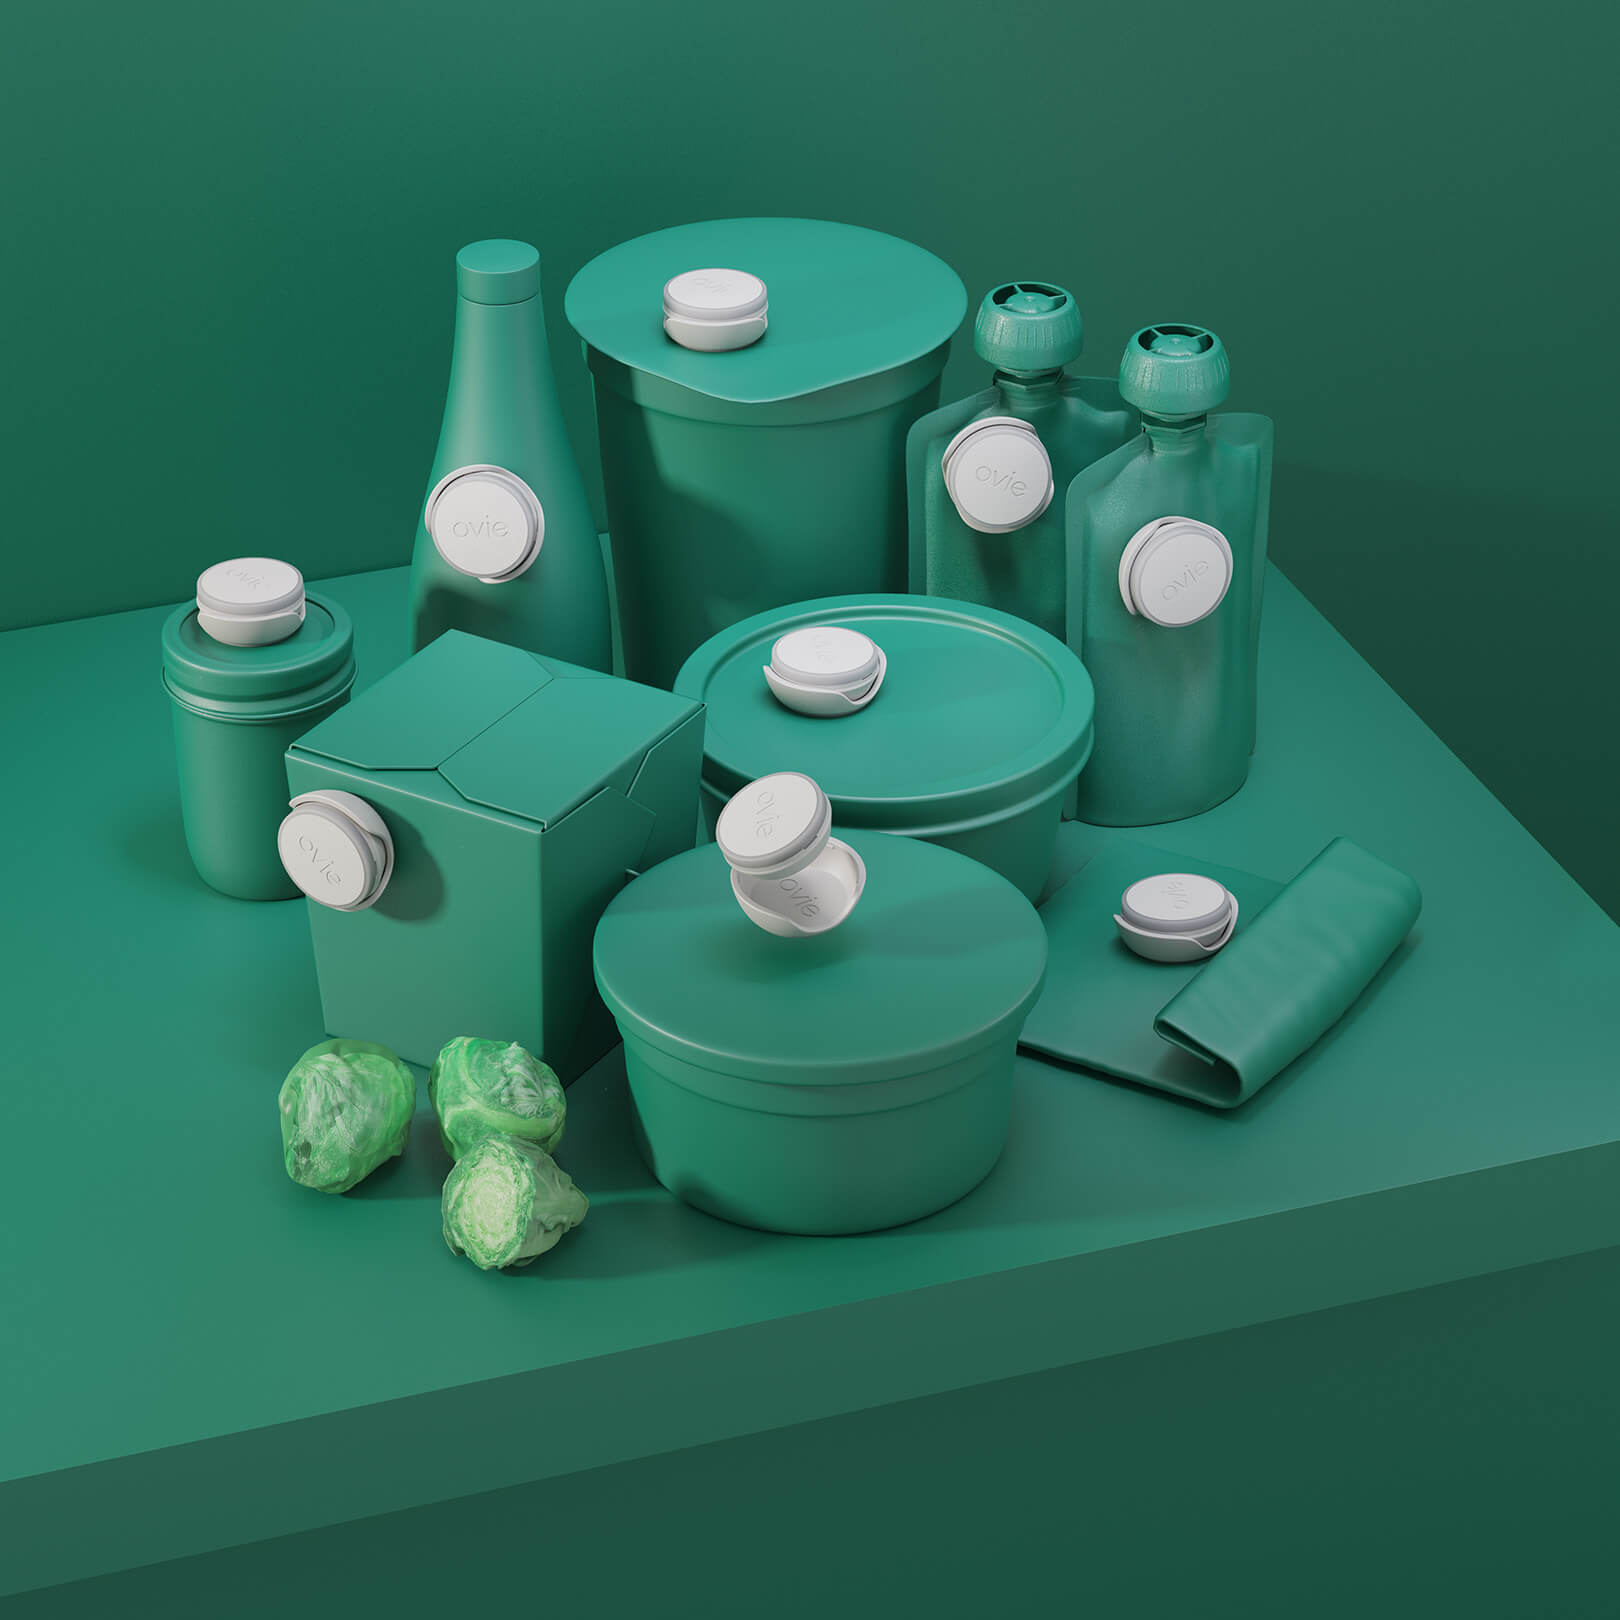 Stylized dark green image with 9 Ovie LightTags placed on various food-shaped containers that match the background. All LightTags are unlit